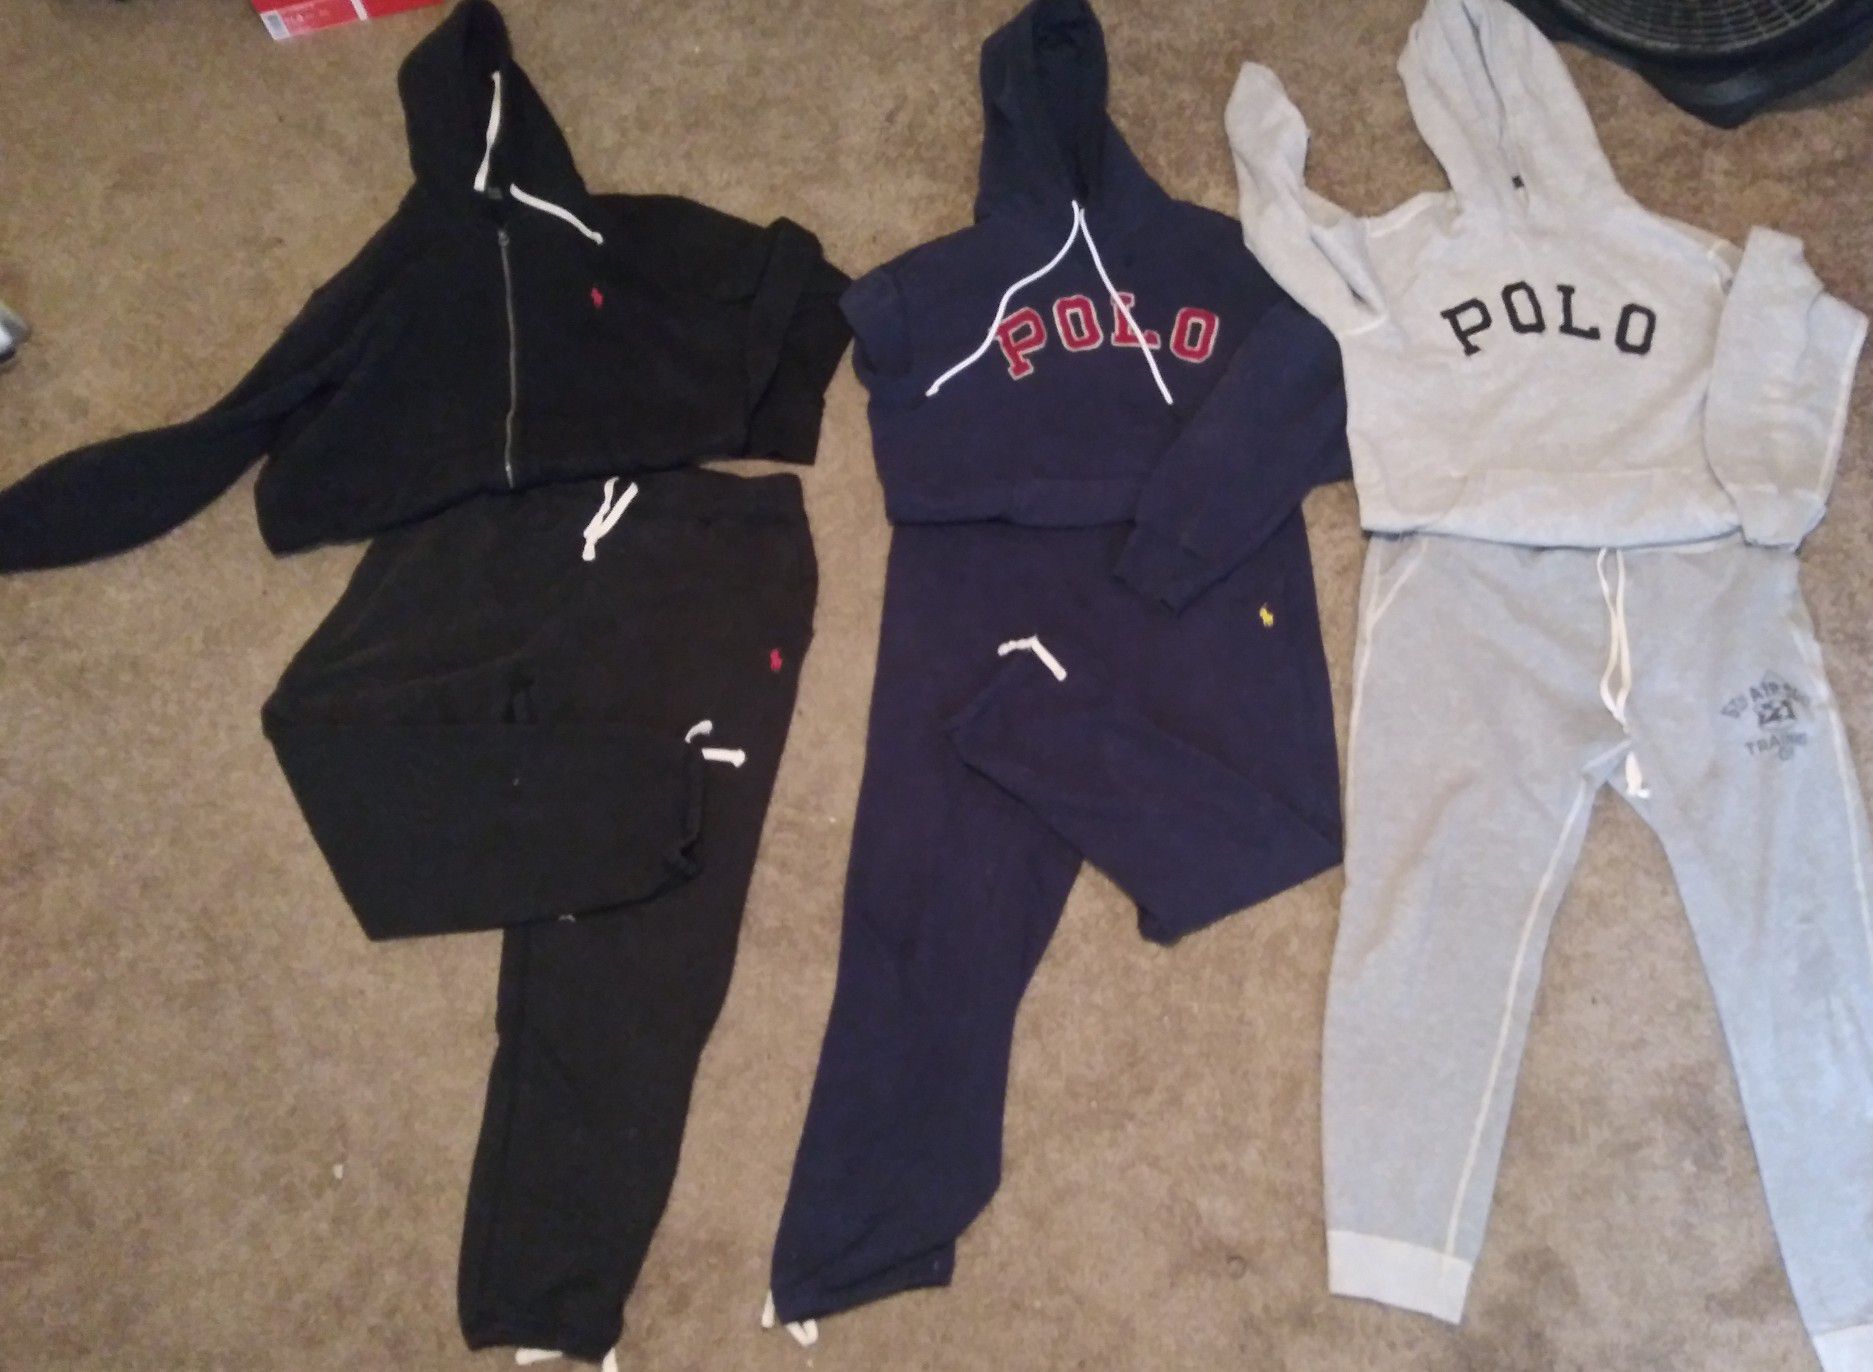 Polo Ralph Lauren authentic sweat suits.. $100 per set or buy by the piece for $50